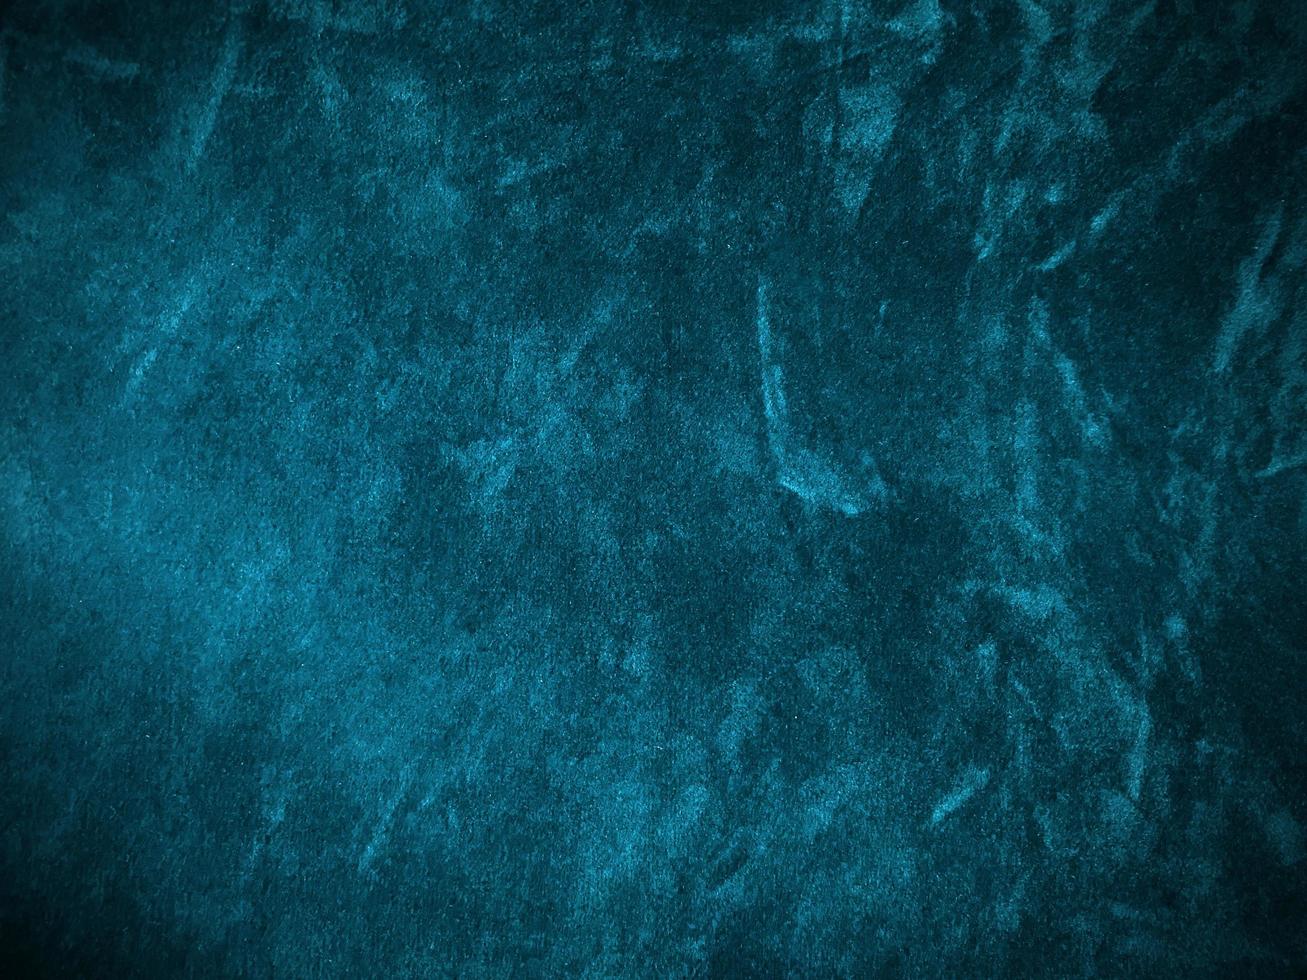 Dark blue marine velvet fabric texture used as background. Empty dark blue fabric background of soft and smooth textile material. There is space for text. photo